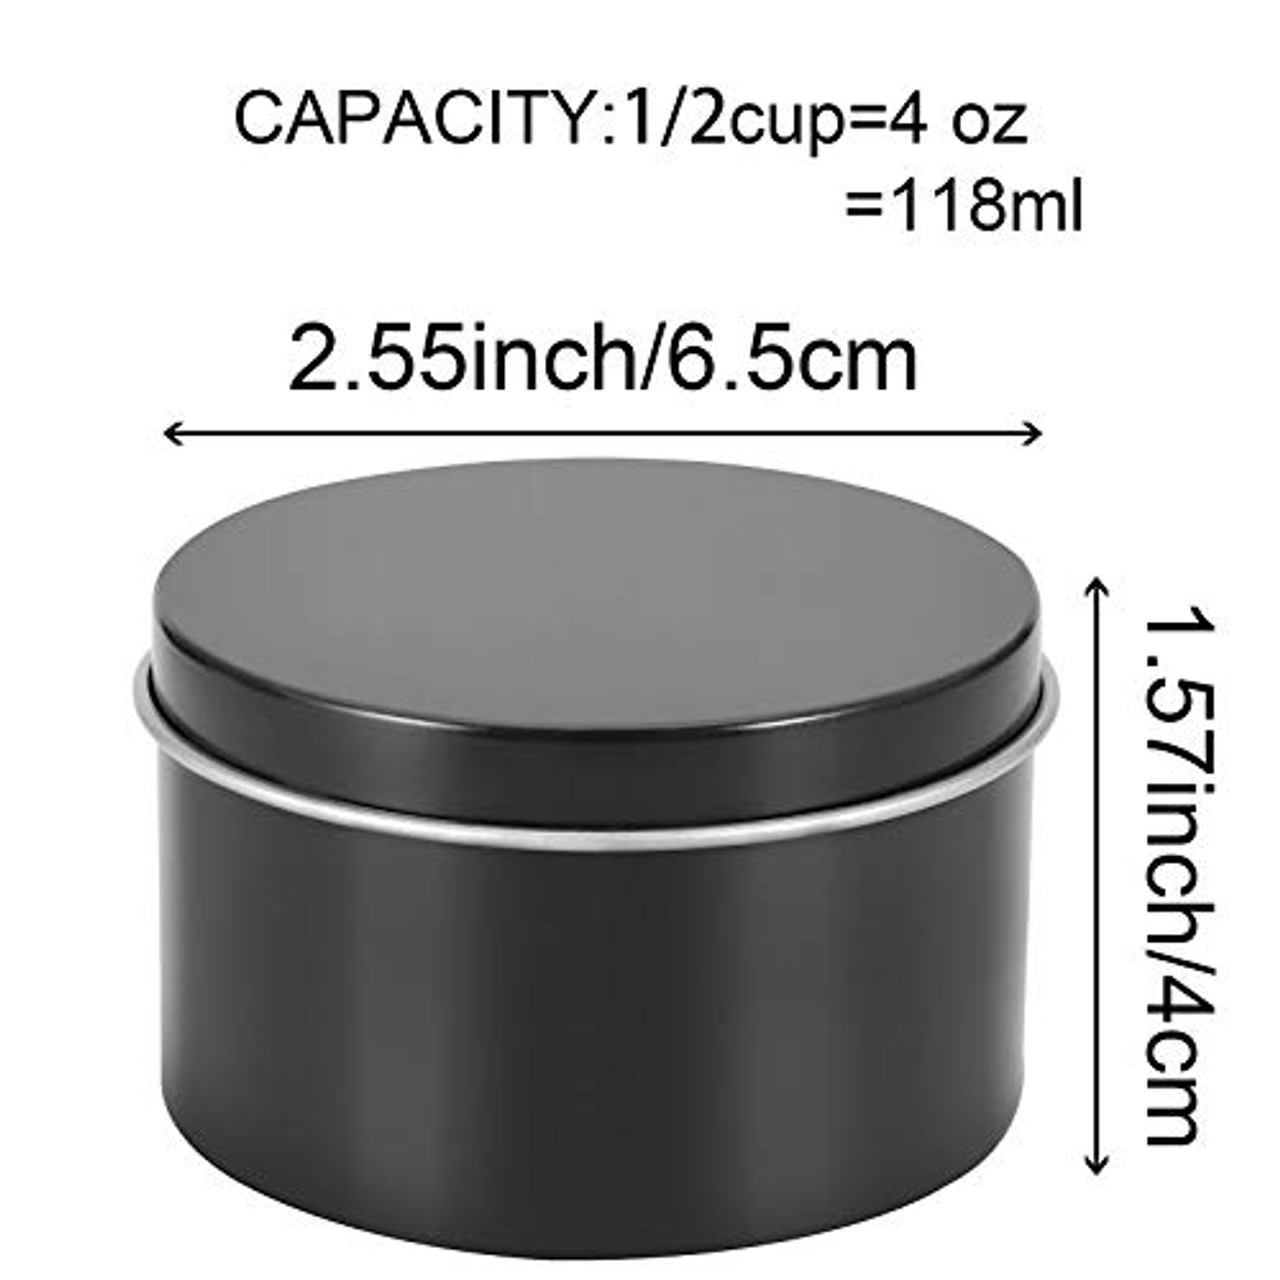 2 Oz Metal Tins With Lids Empty Product or Storage Tins Party Favor Tin  Empty Tins Set of 12 